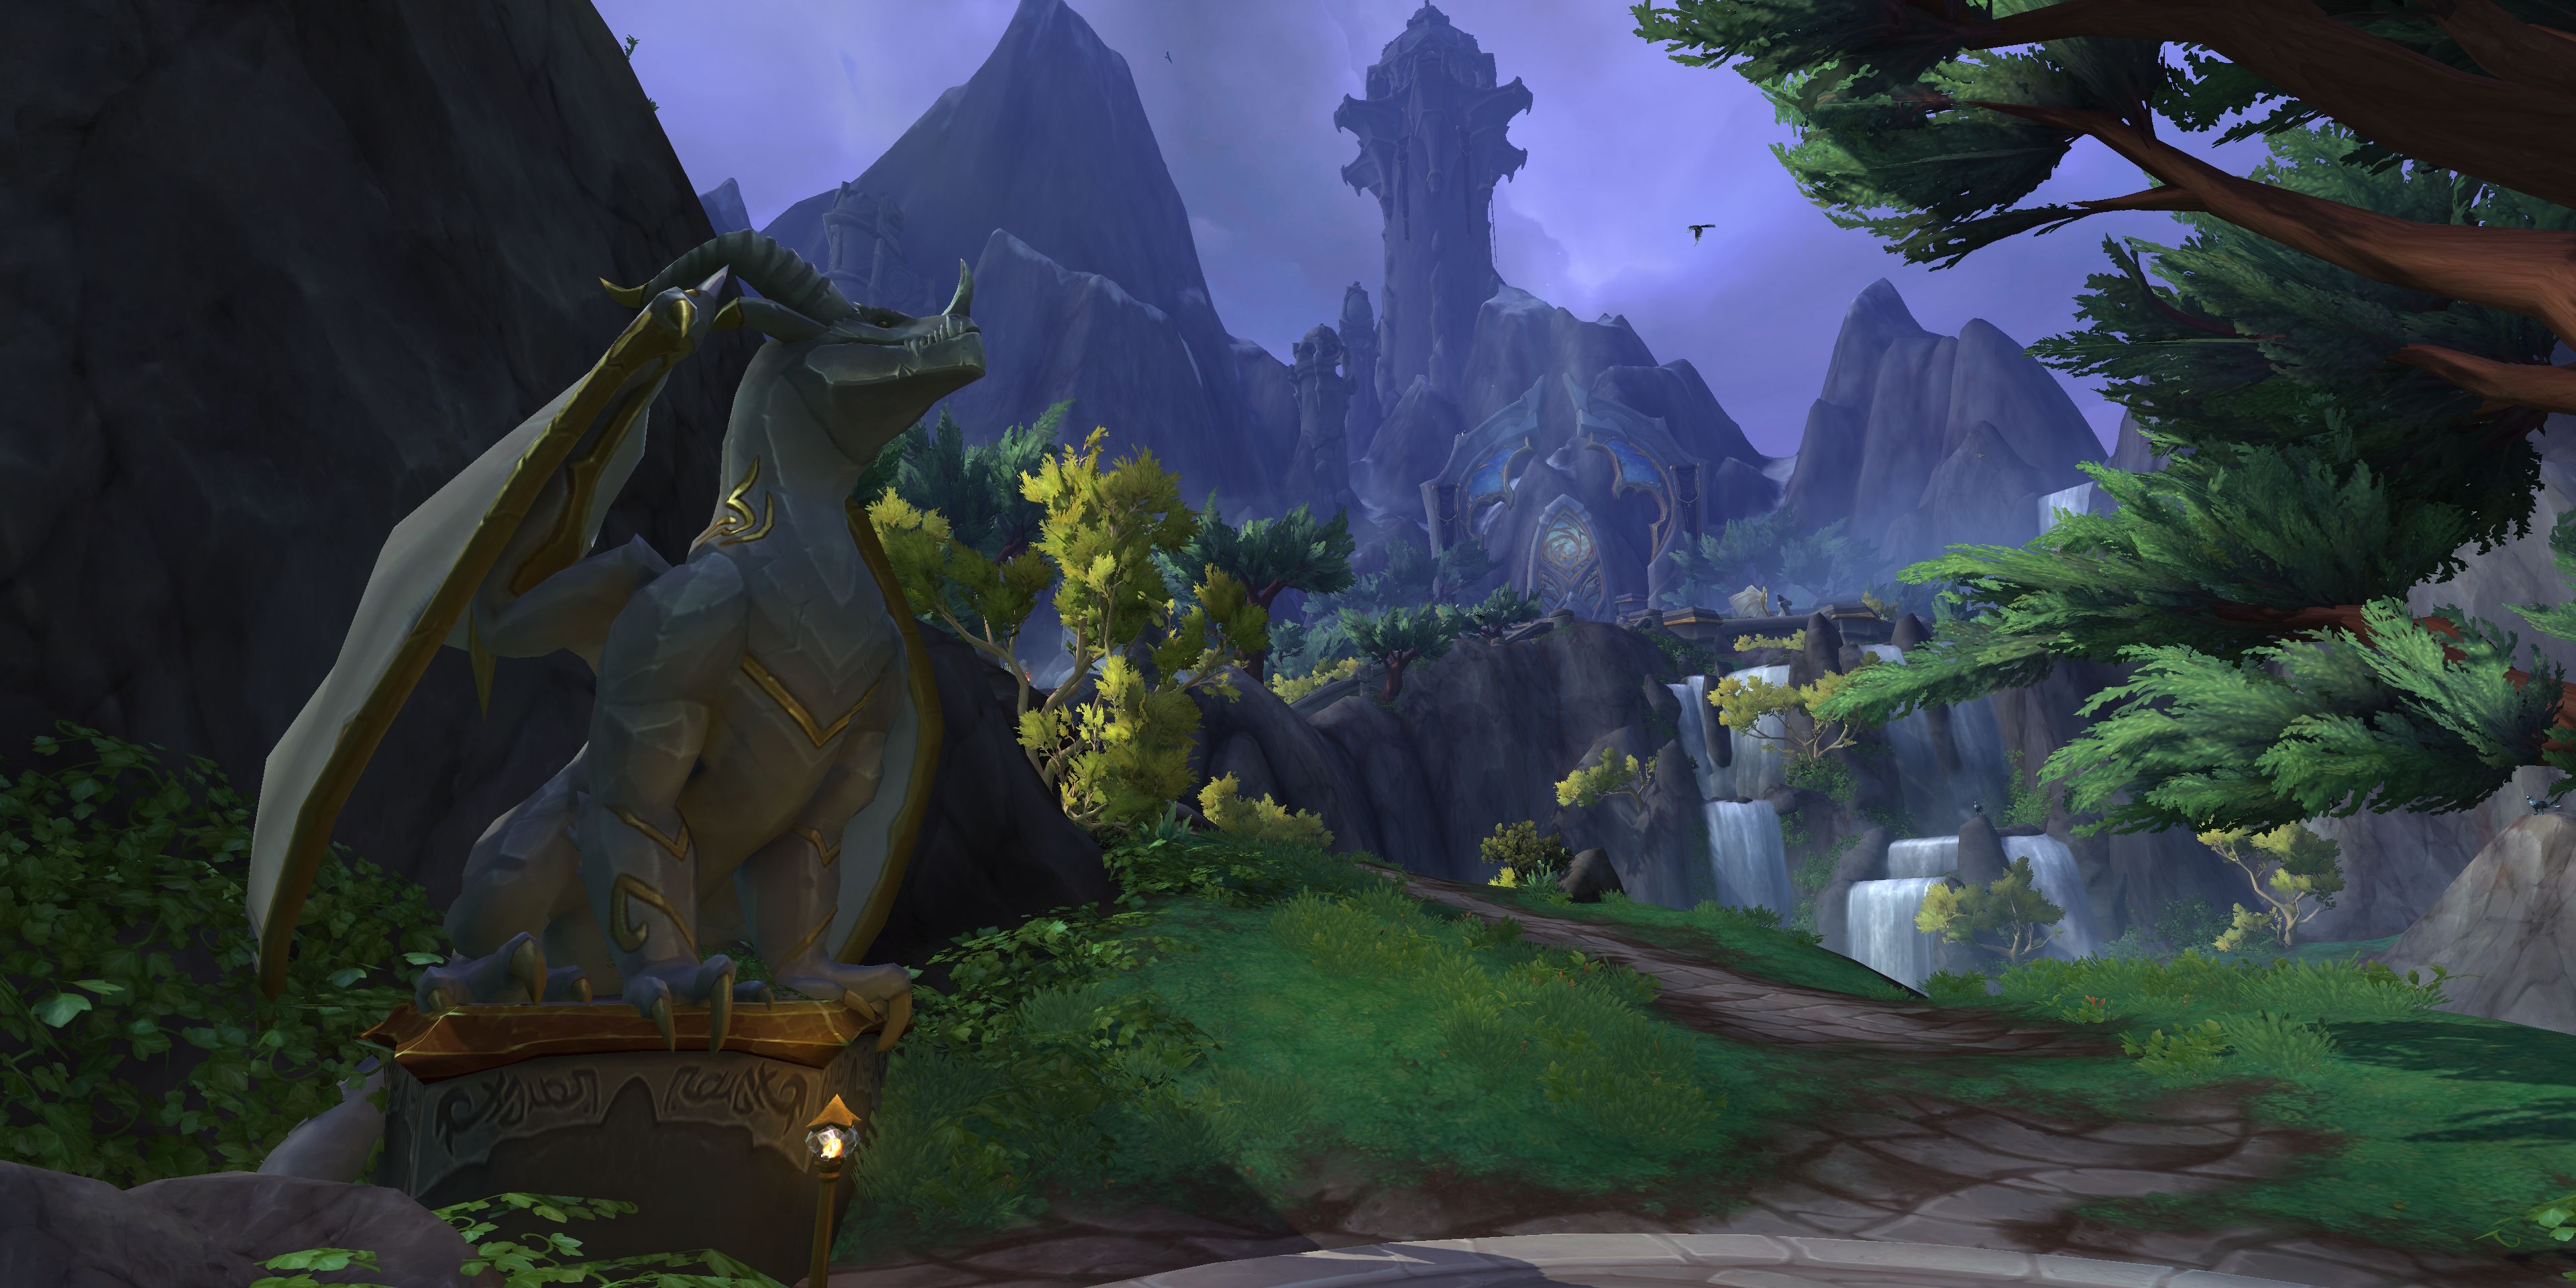 Forbidden Reach in World of Warcraft, with a majestic statue of a dragon to the left side of a stone pathway that leads around the side of a cliff, buildings and waterfalls in the distance